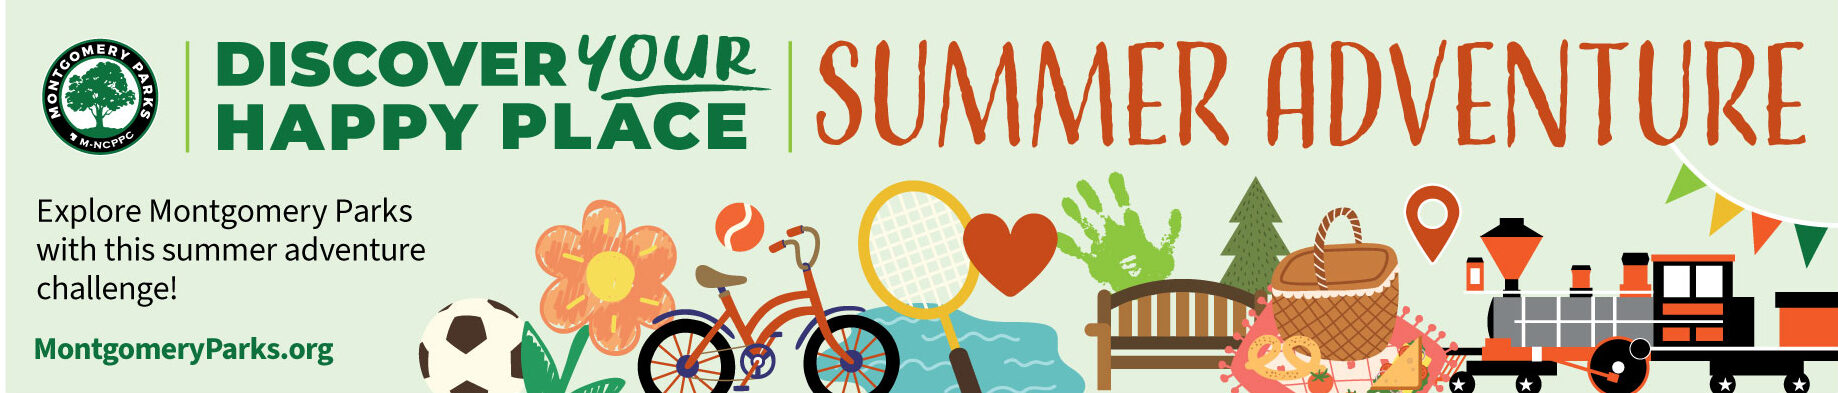 Montgomery Parks Discover Your Happy Place Summer Adventure graphic